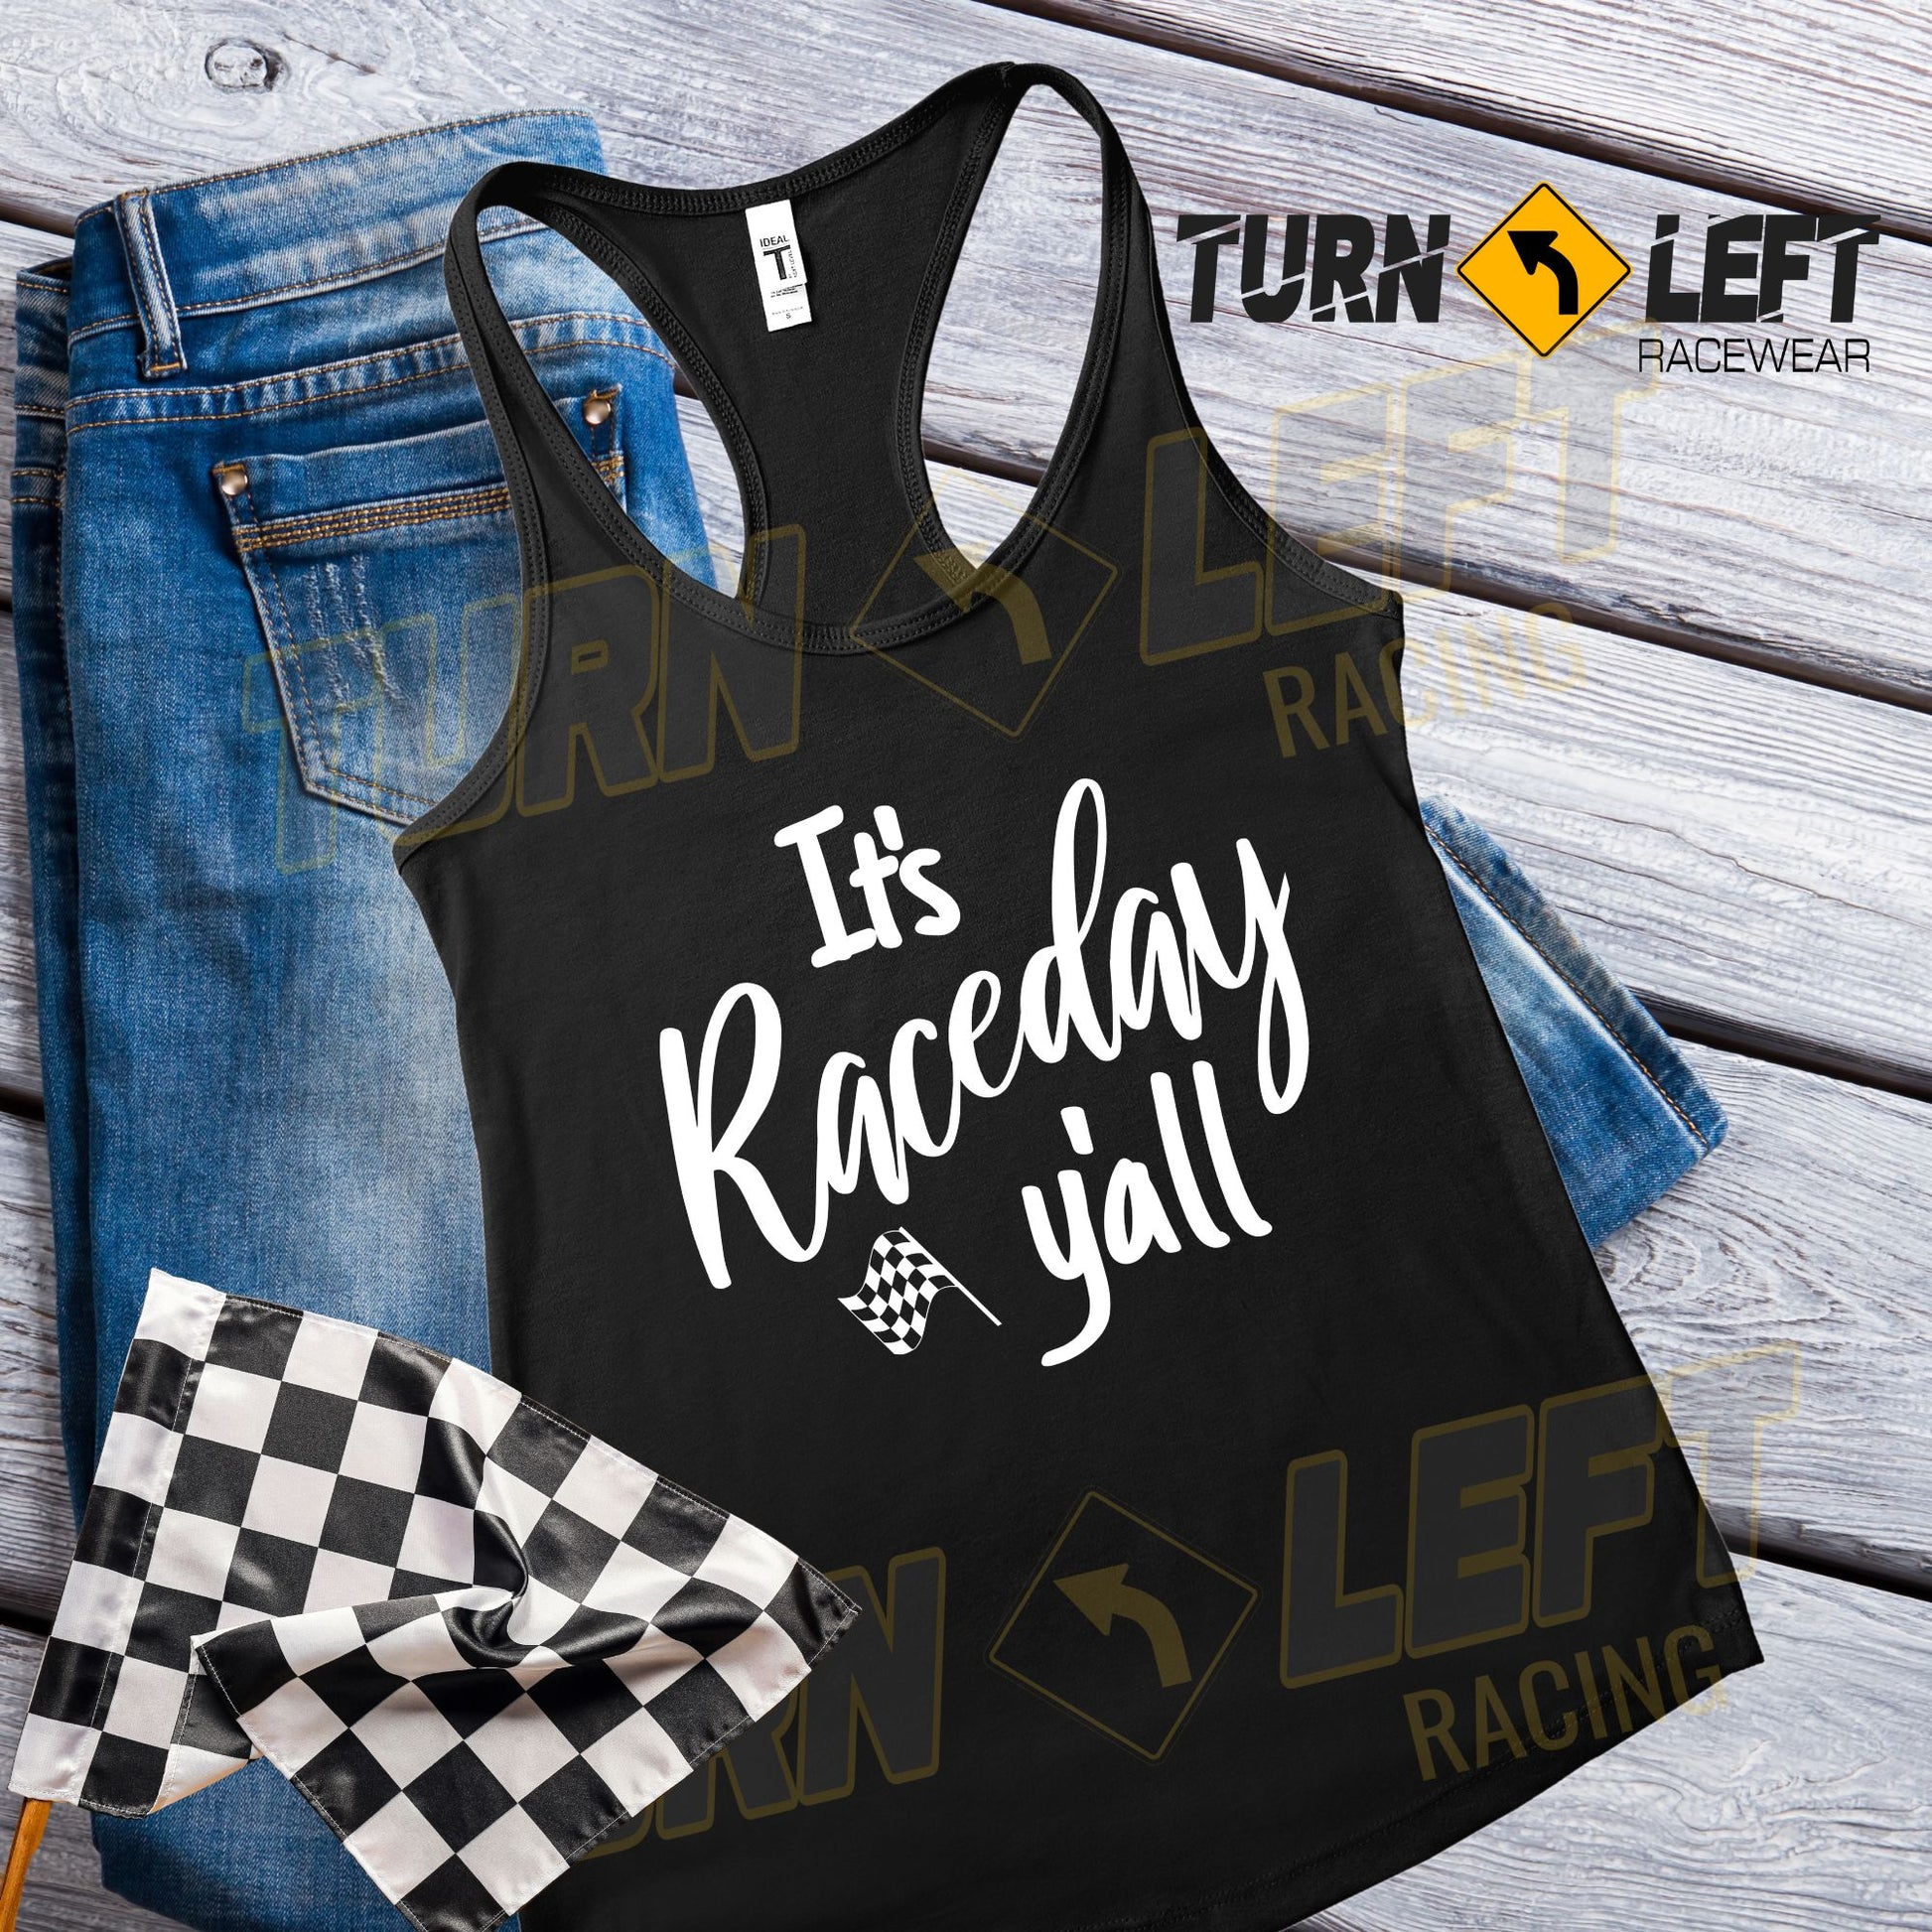 It's Raceday Y'all Tank Tops. Womens racetrack tank tops. Race quote shirts. Womens racing gifts. Dirt Track Racing Apparel. It's Race Day Y'all Shirts